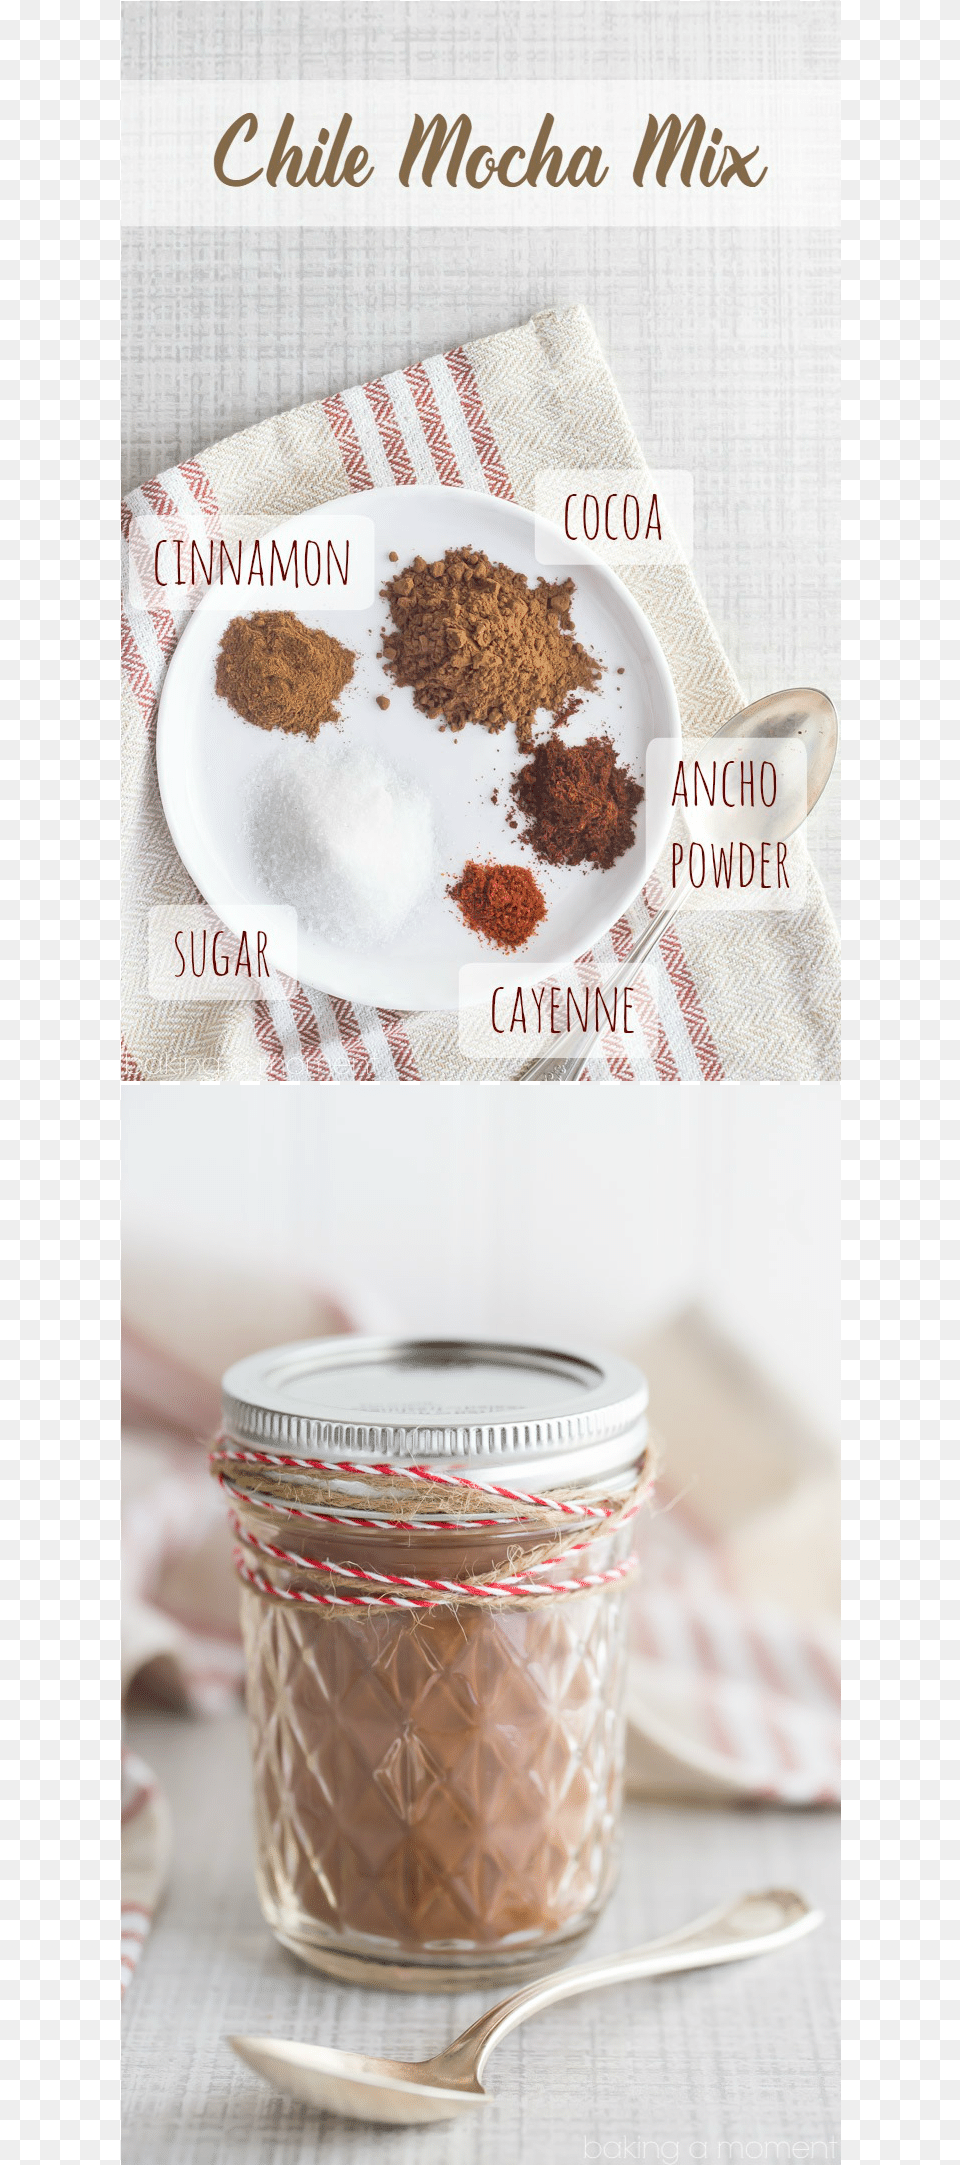 Chile Mocha Mix Just Add It To Your Regular Coffee Starbucks Spicy Powder, Cutlery, Spoon, Jar, Plate Free Png Download